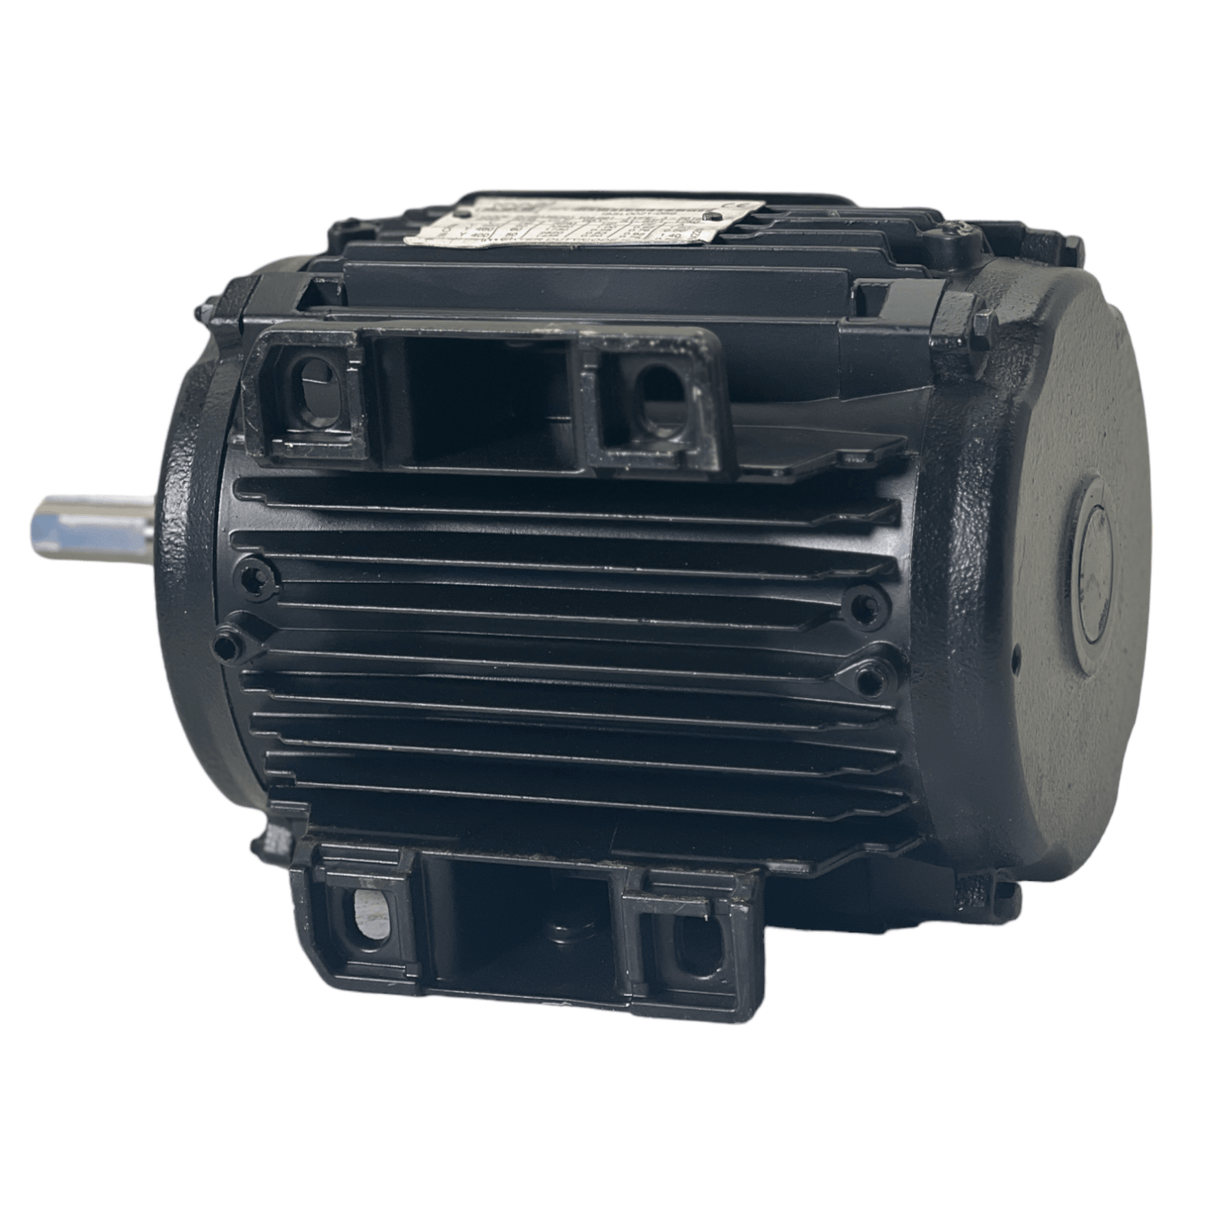 104-691 Oem Thermo King Motor Blower Evaporator For Thermoking Reefer Container - Truck To Trailer